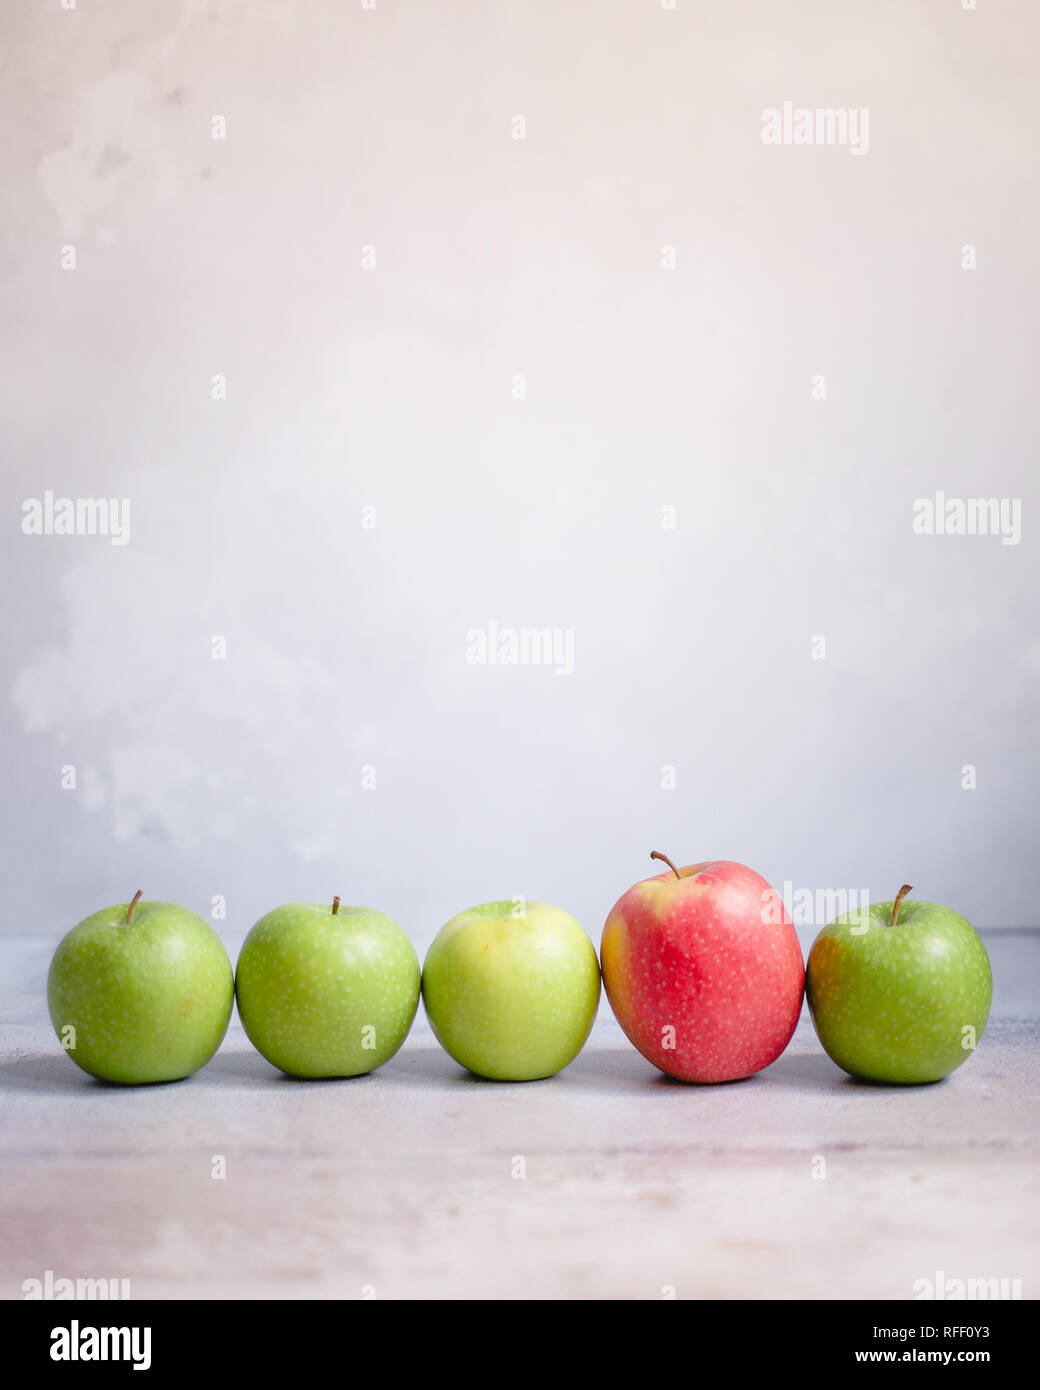 Four green apples and one red apple in a line against a neutral background Stock Photo